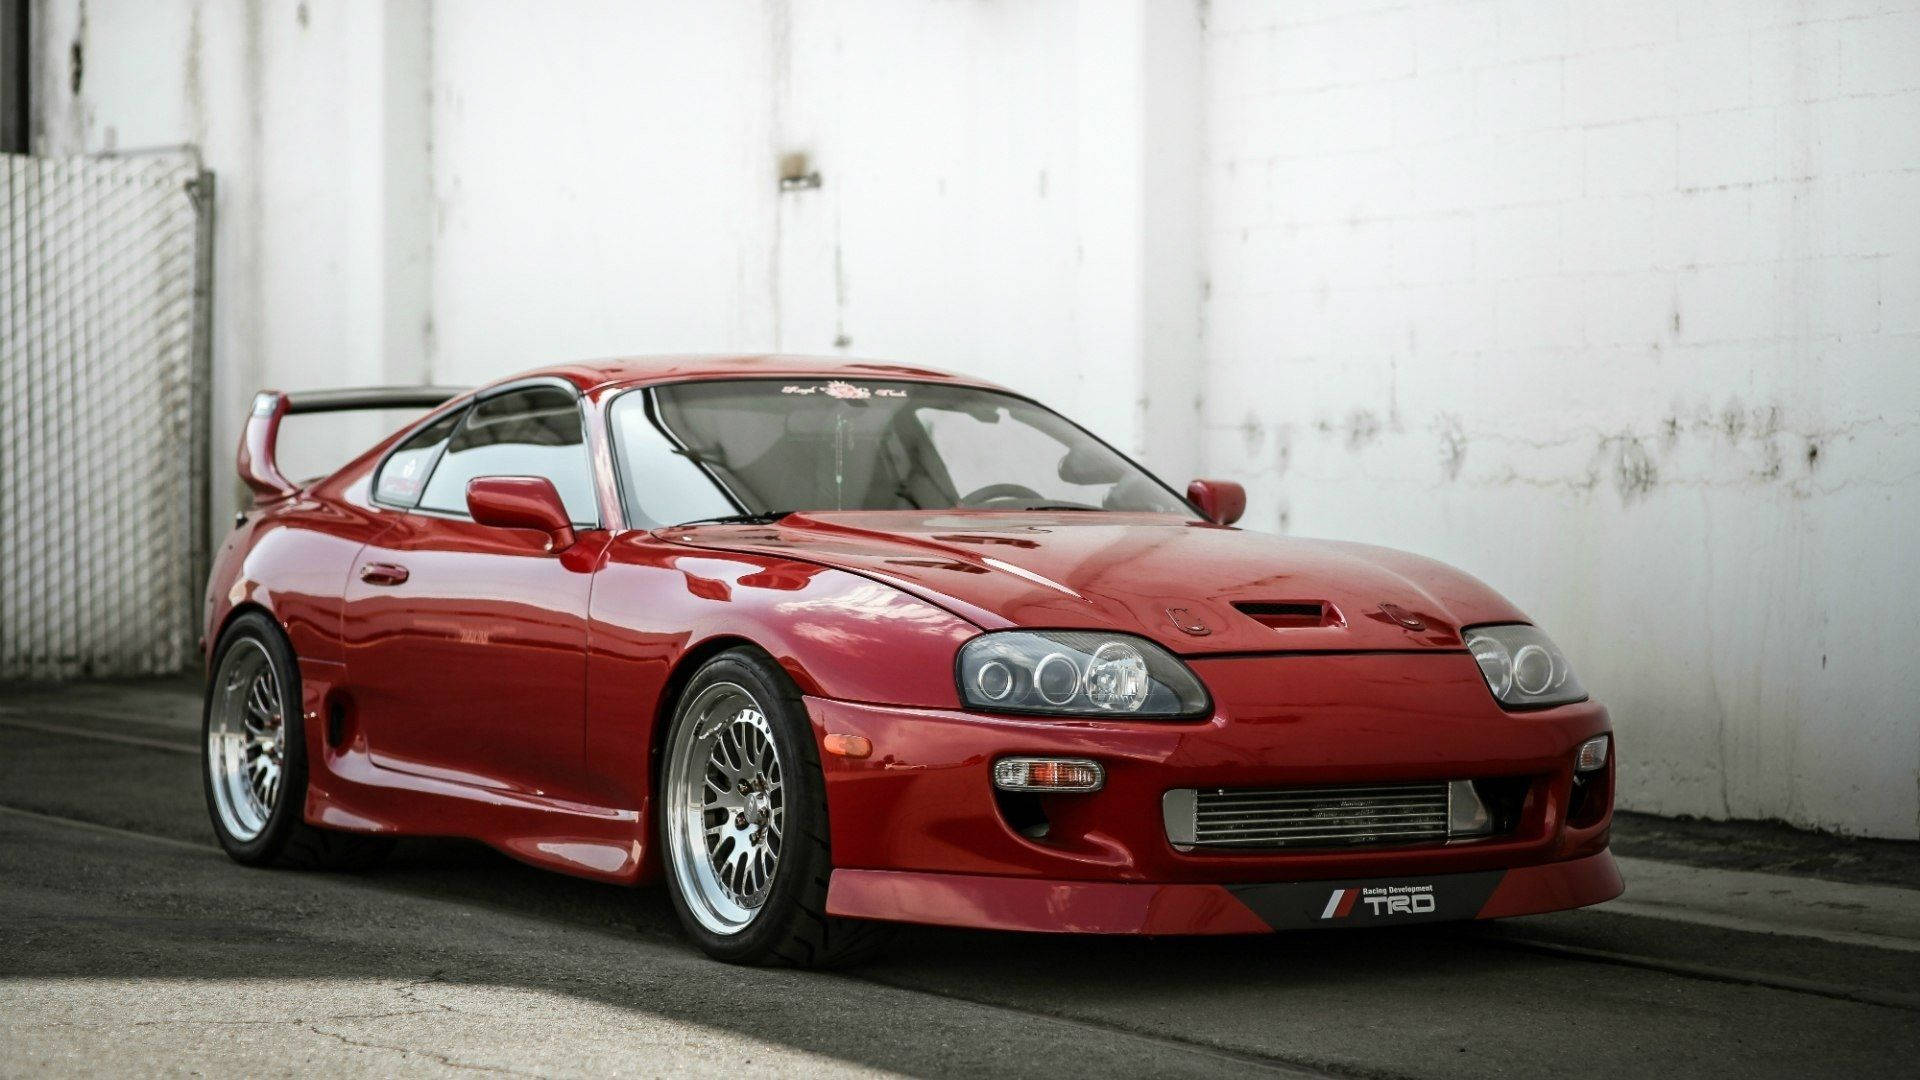 Hot Red Toyota Auto Wallpaper